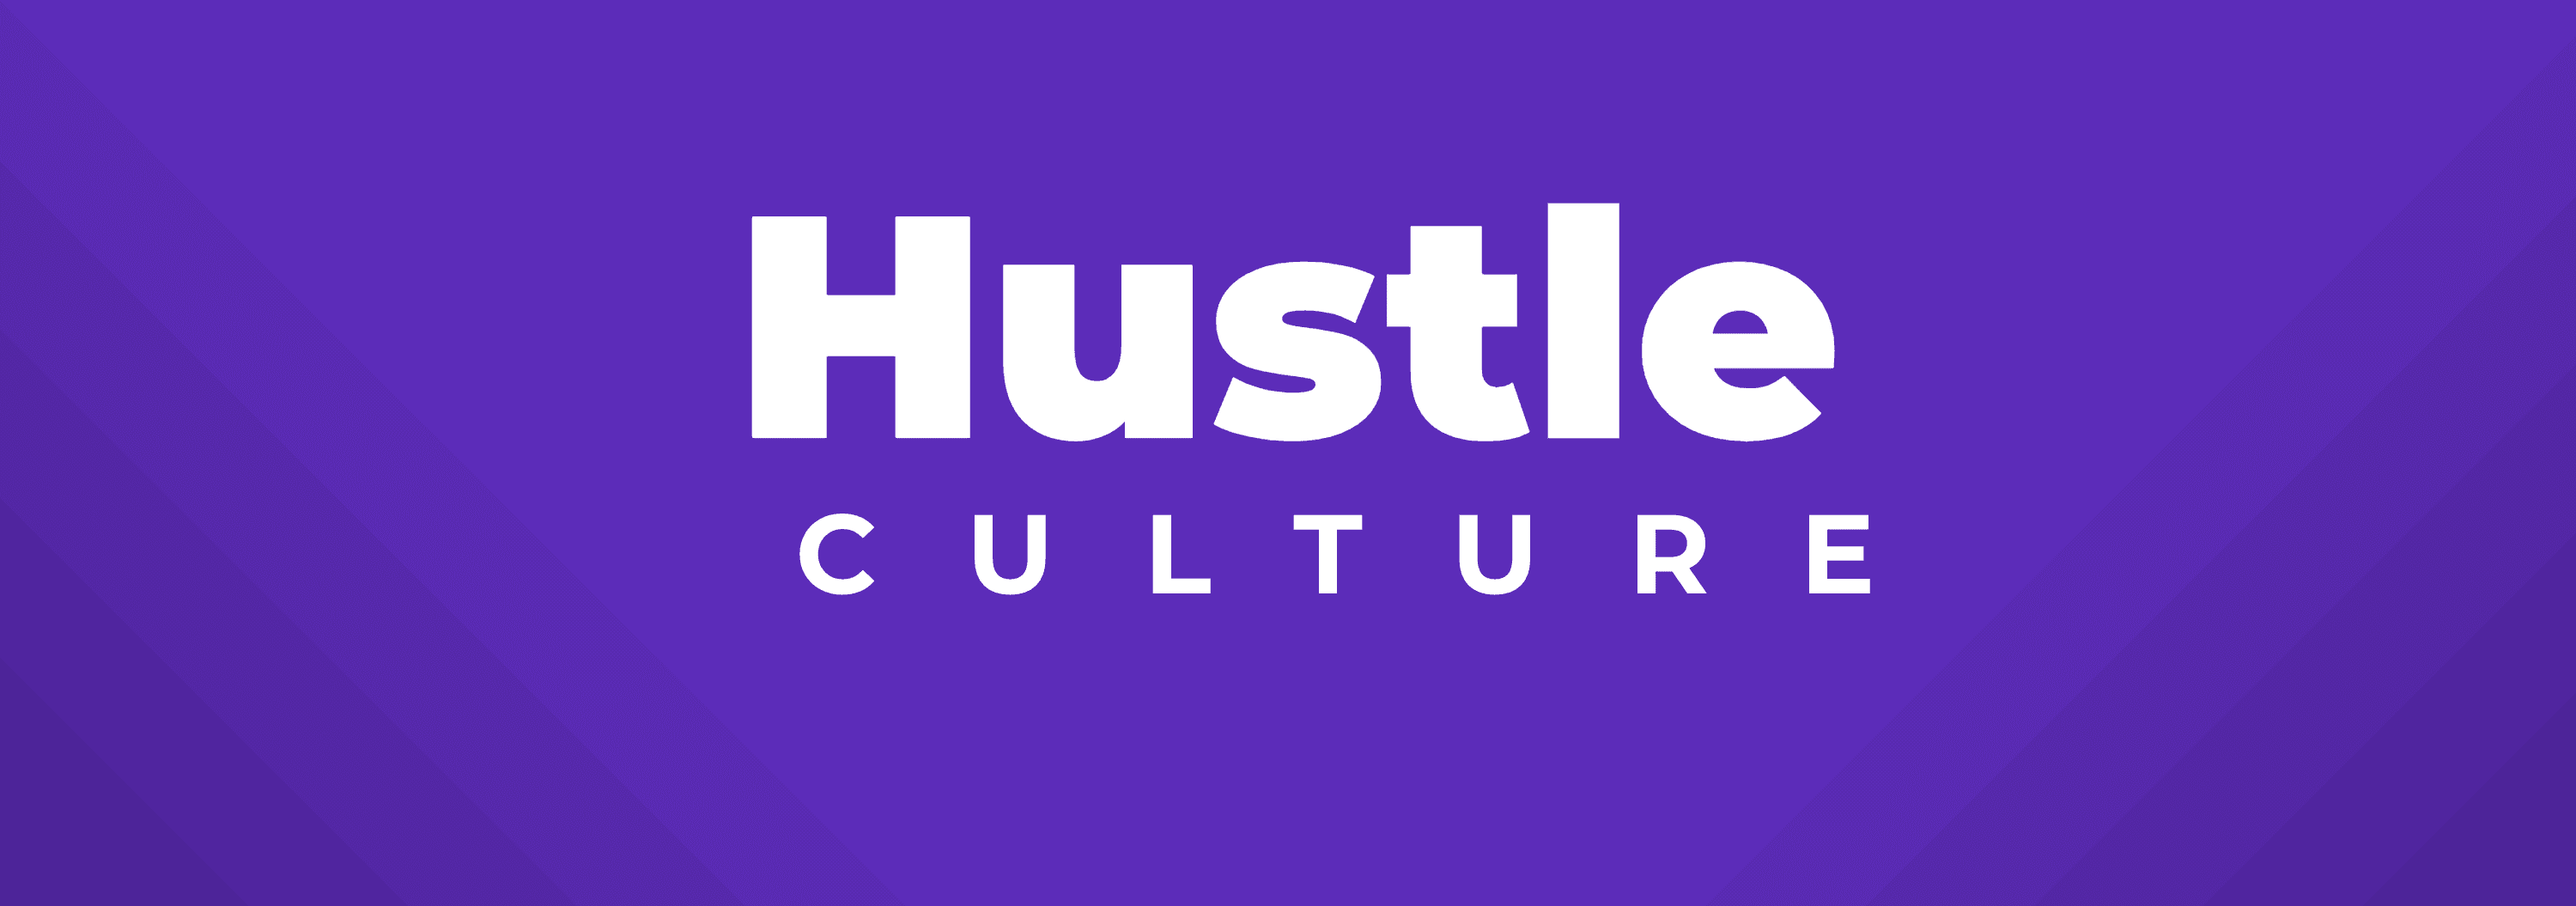 purple-and-white-hustle-culture-tumblr-banner-template-thumbnail-img